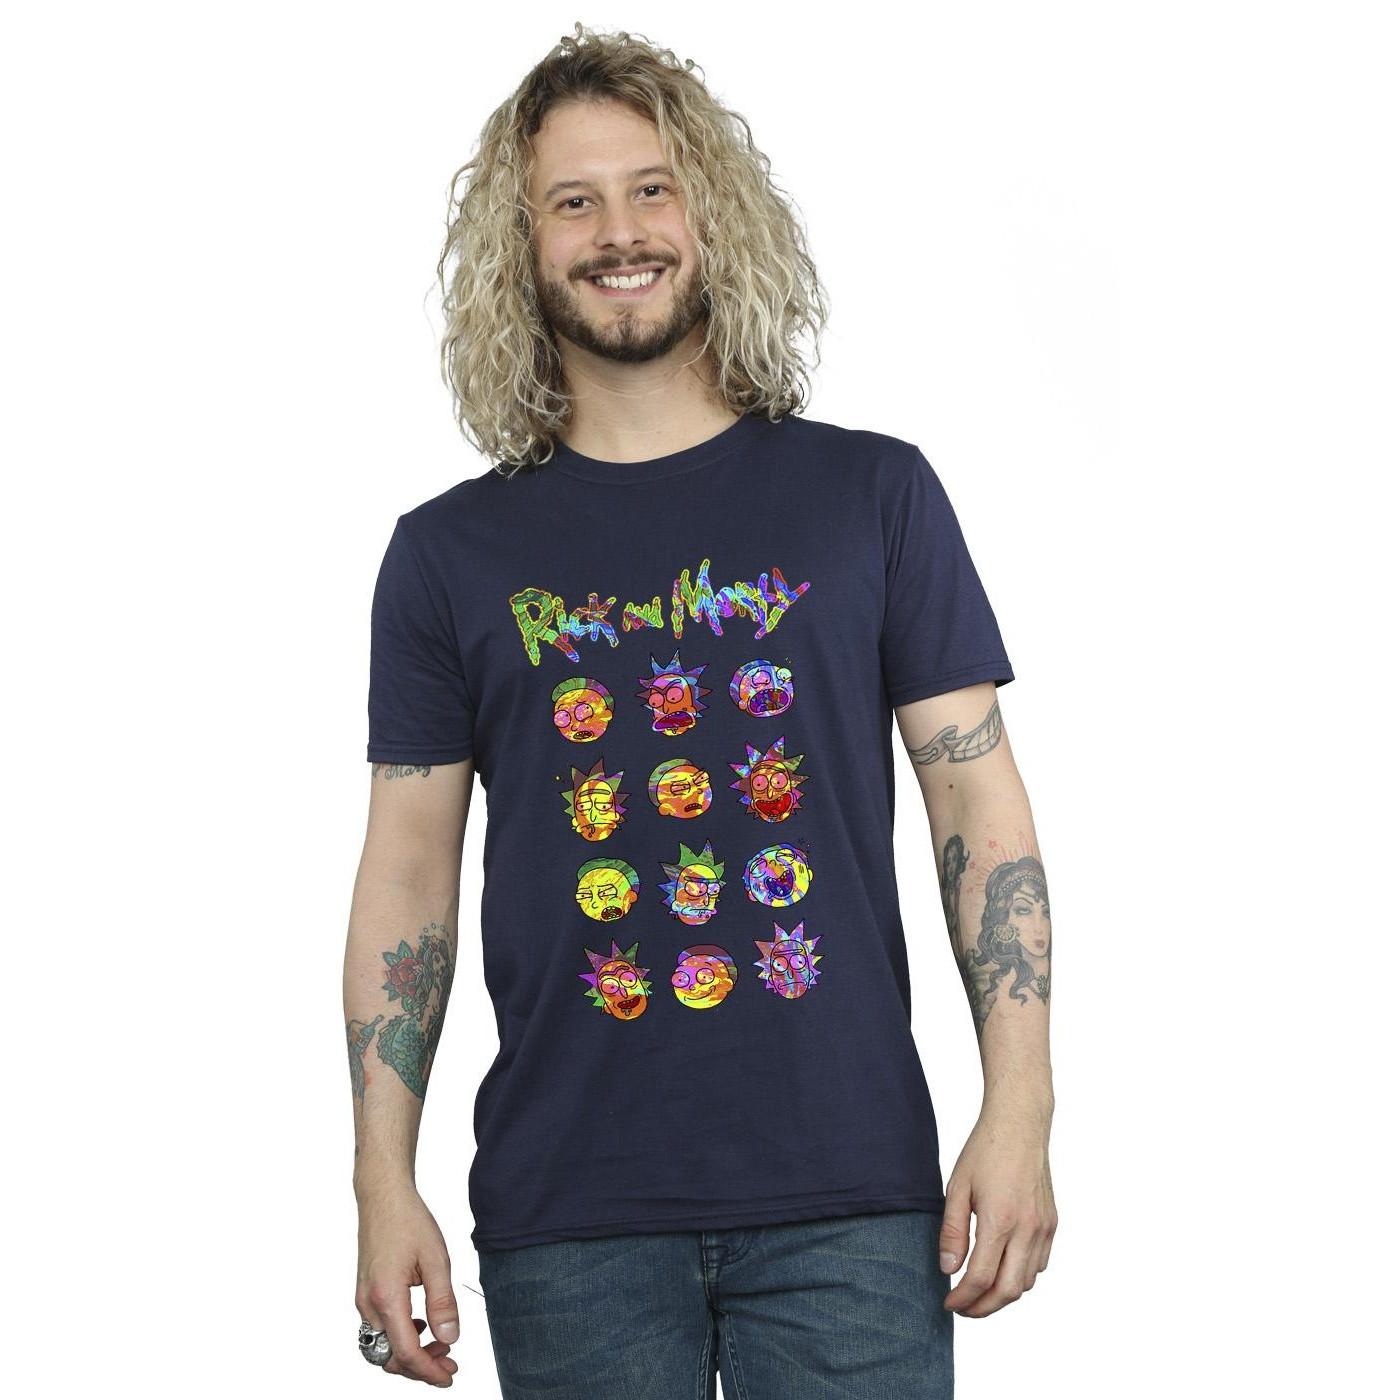 Rick And Morty  Tie Dye Faces TShirt 